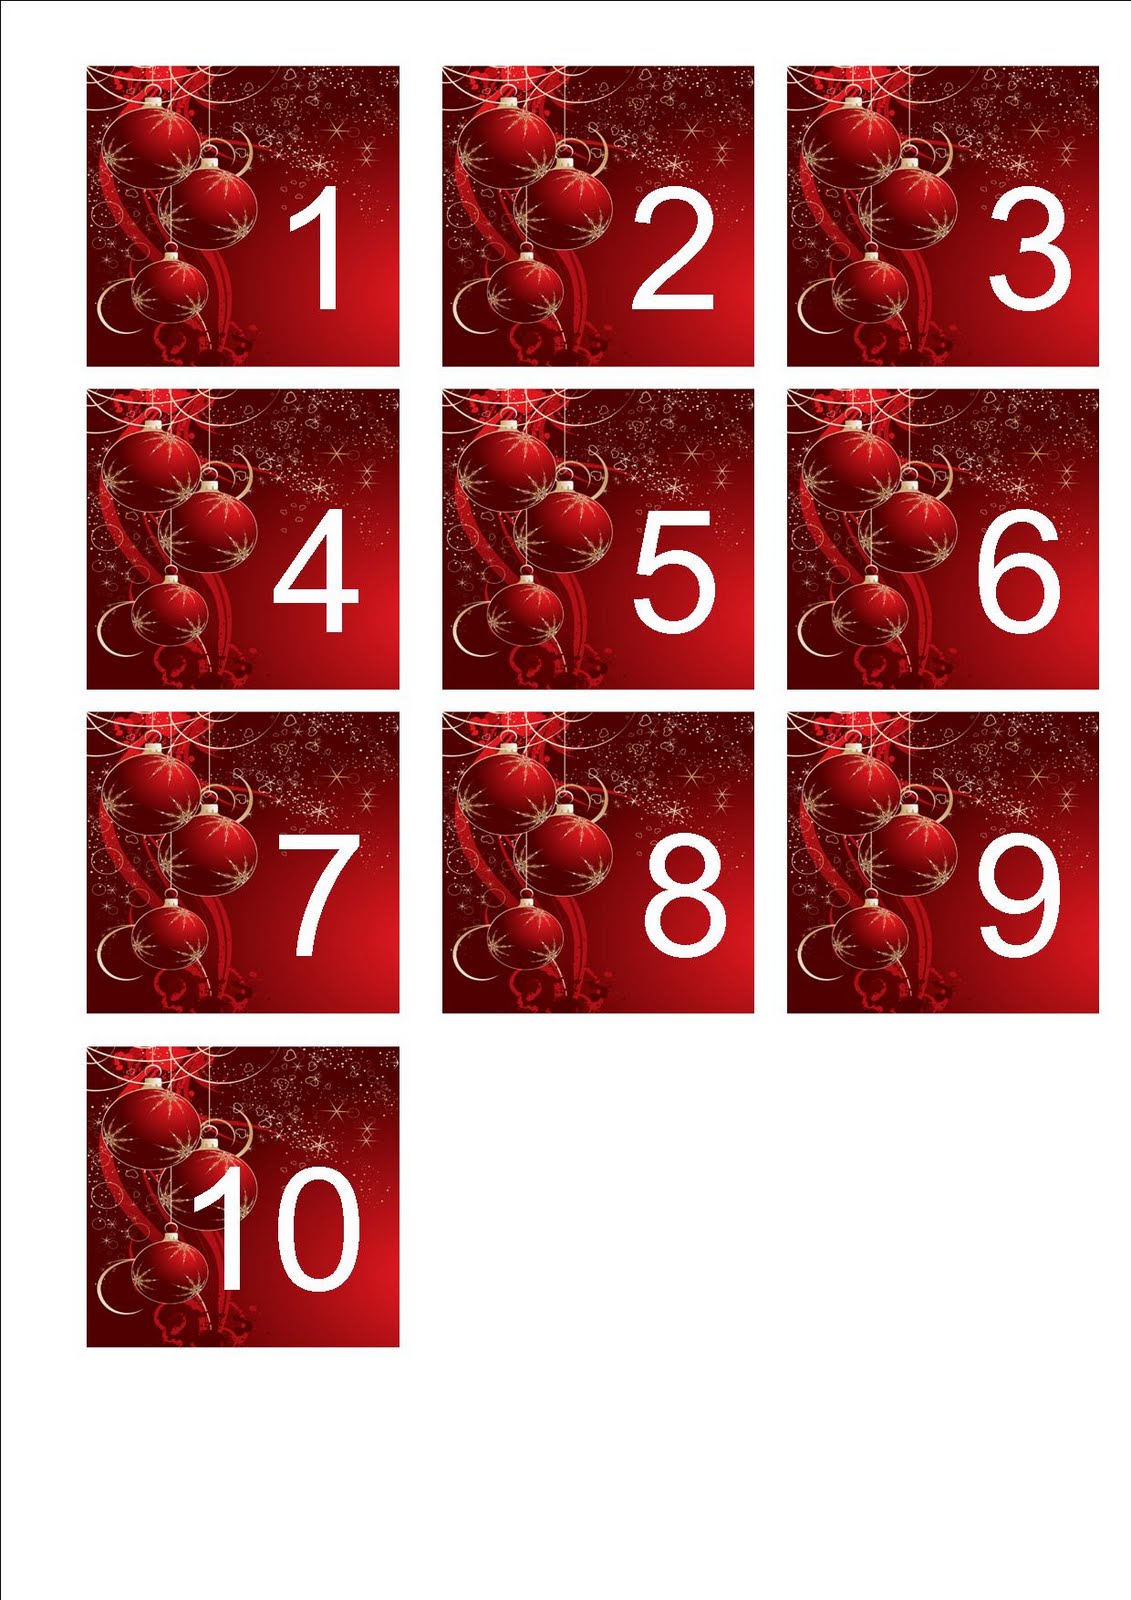 Our Worldwide Classroom Free Printable Christmas Number Sequencing